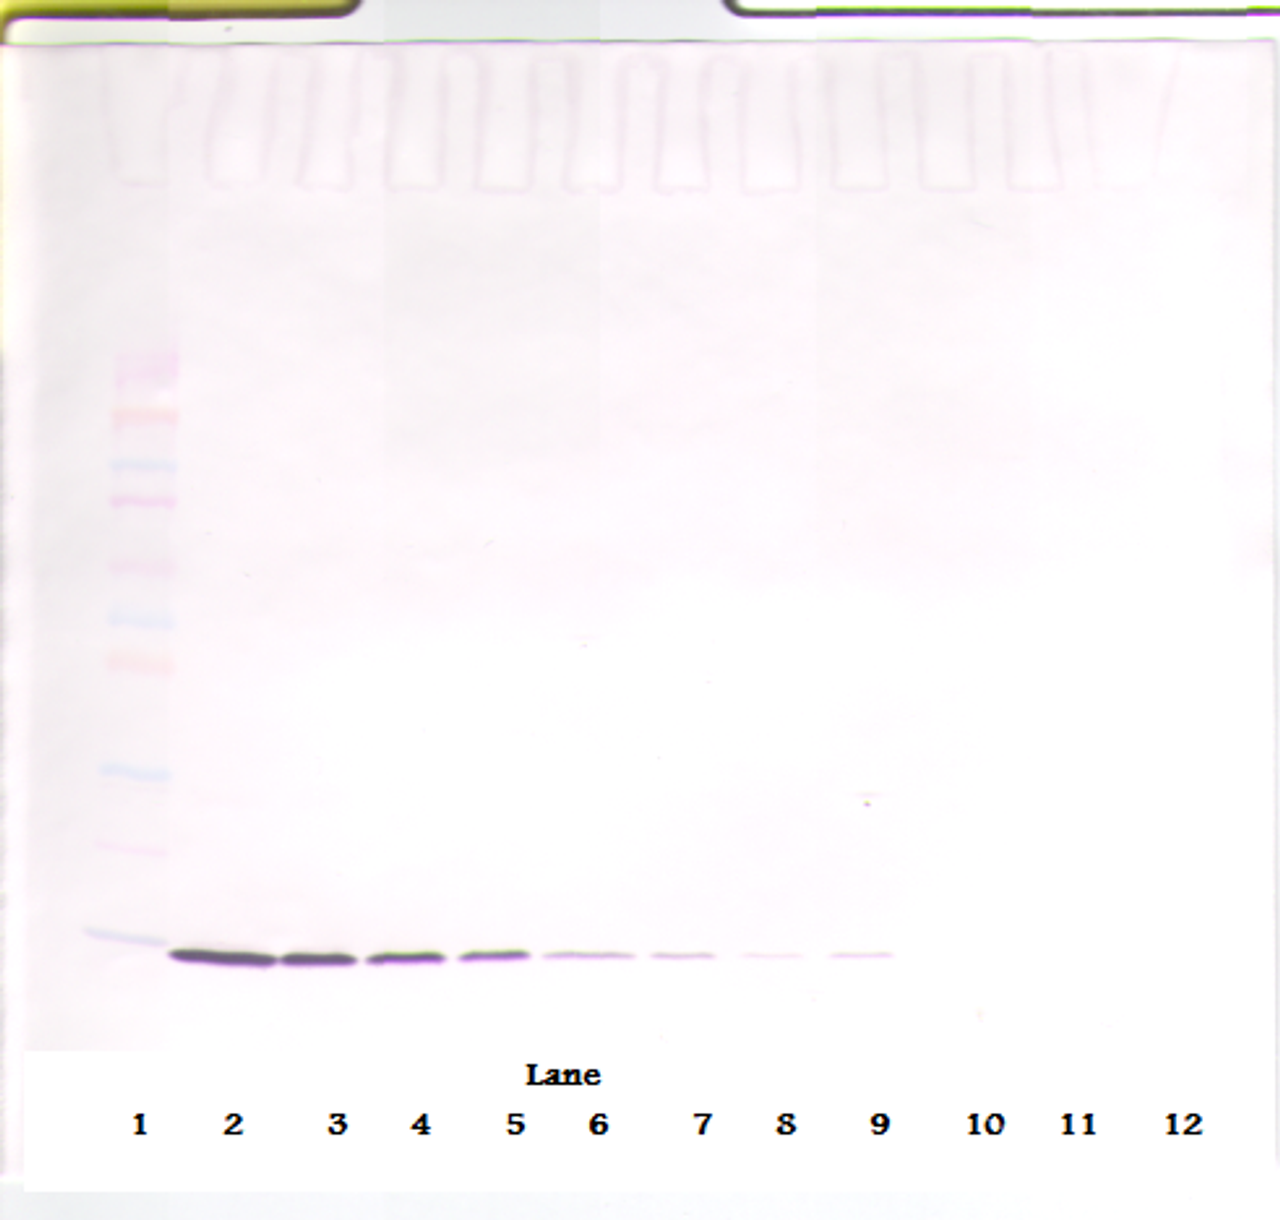 To detect rat IL-2 by Western Blot analysis this antibody can be used at a concentration of 0.25-0.50 ug/ml. When used in conjunction with compatible secondary reagents the detection limit for recombinant rat IL-2 is 2.0-4.0 ng/lane, under reducing or non-reducing conditions.